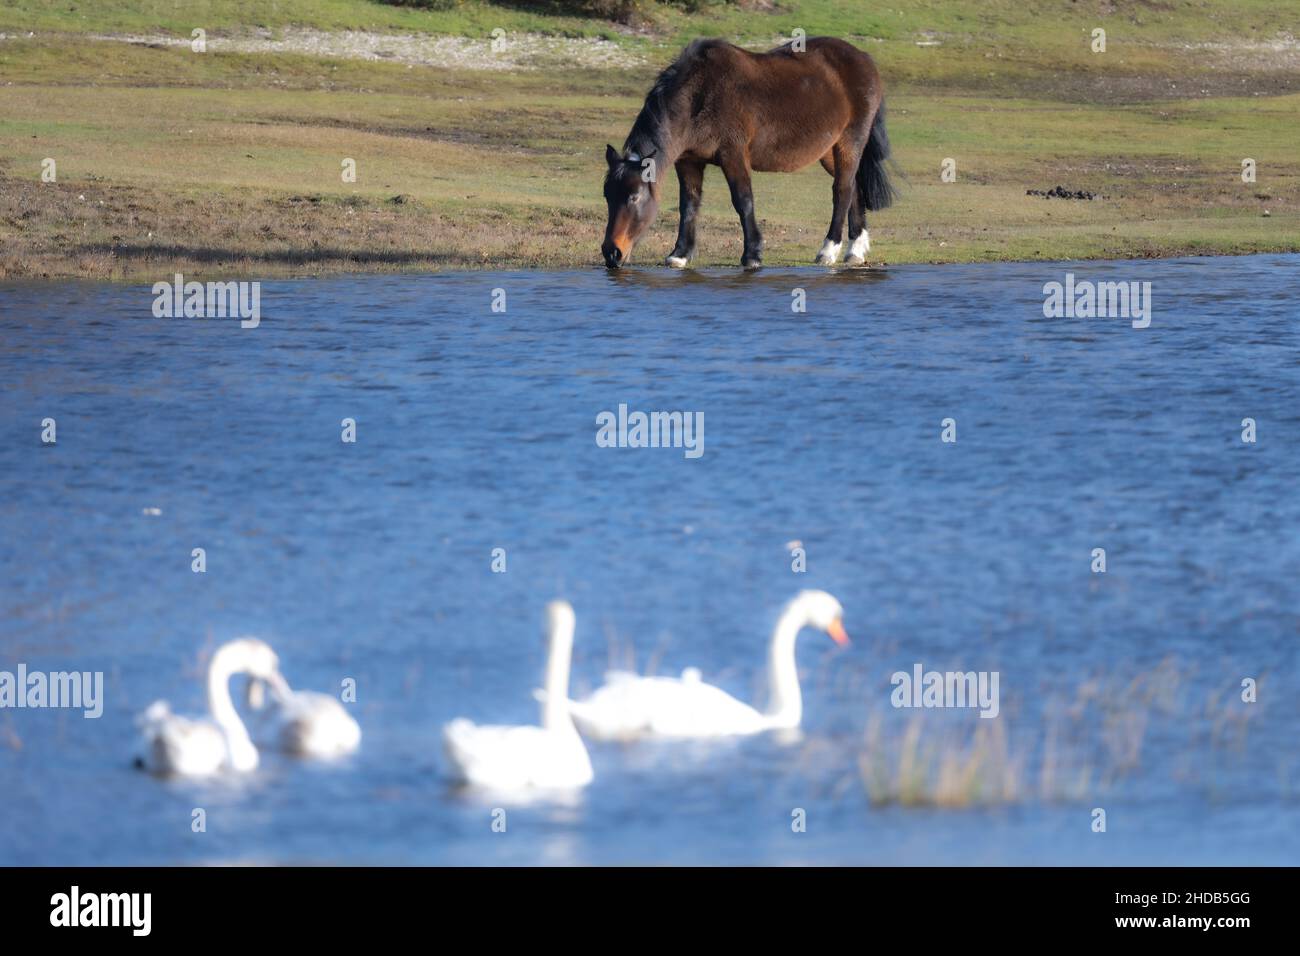 Lakeside grazing, a New Forest pony beside a lake with swans. New Forest, Hampshire, UK Stock Photo